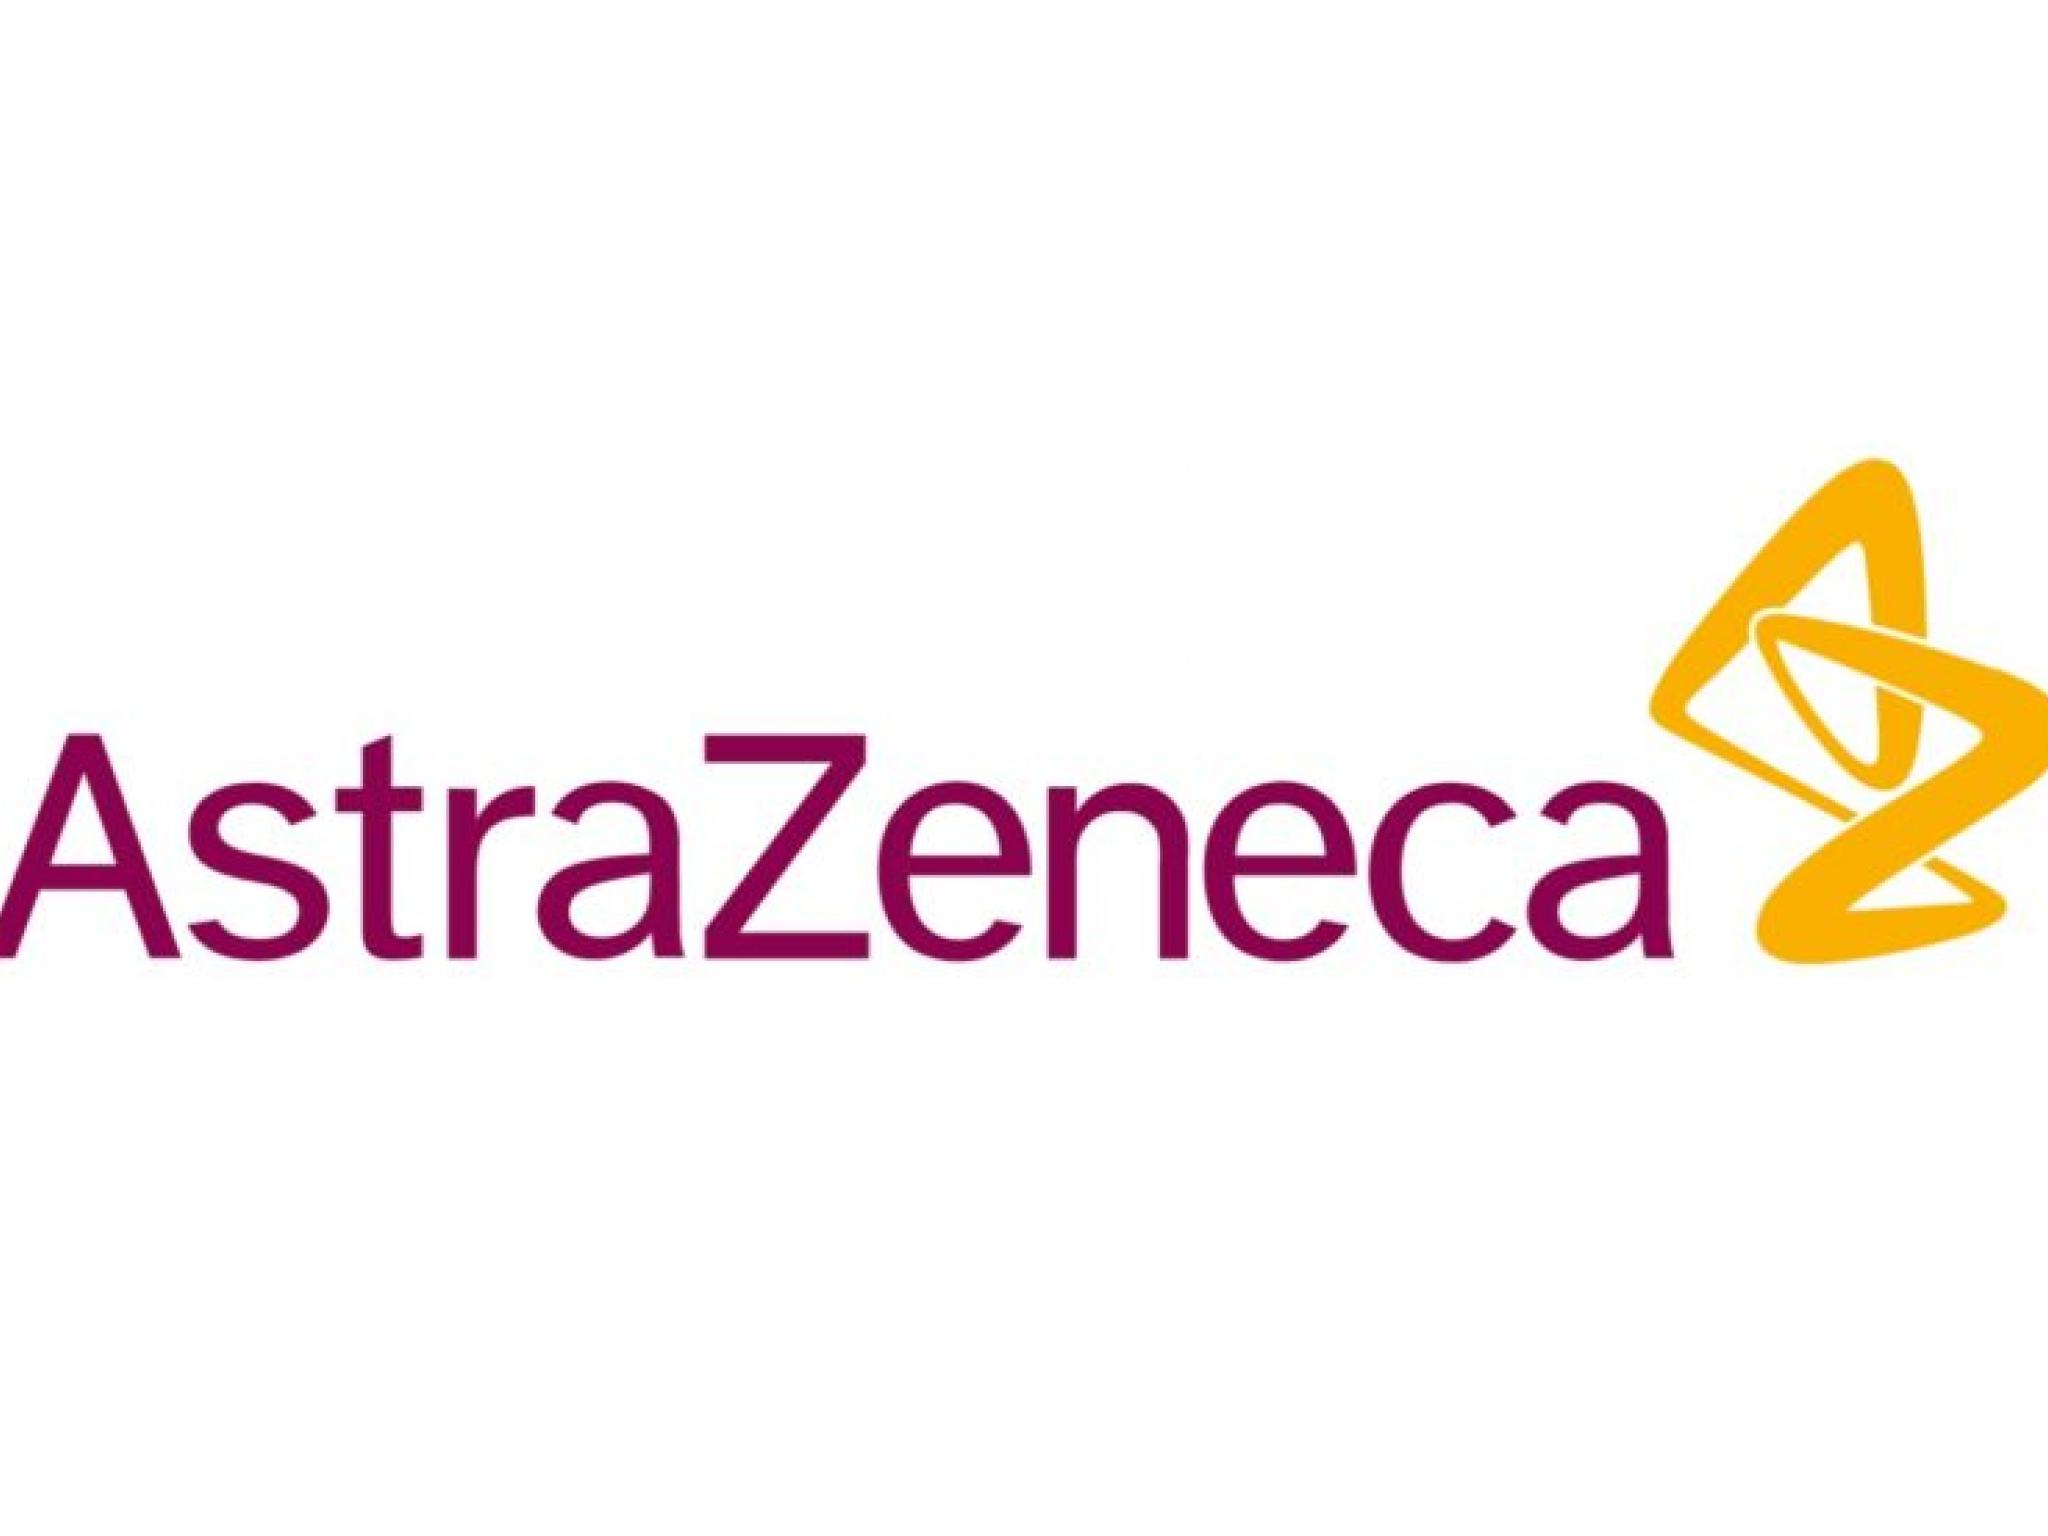  double-good-news-for-astrazenecas-breast-cancer-drugs 